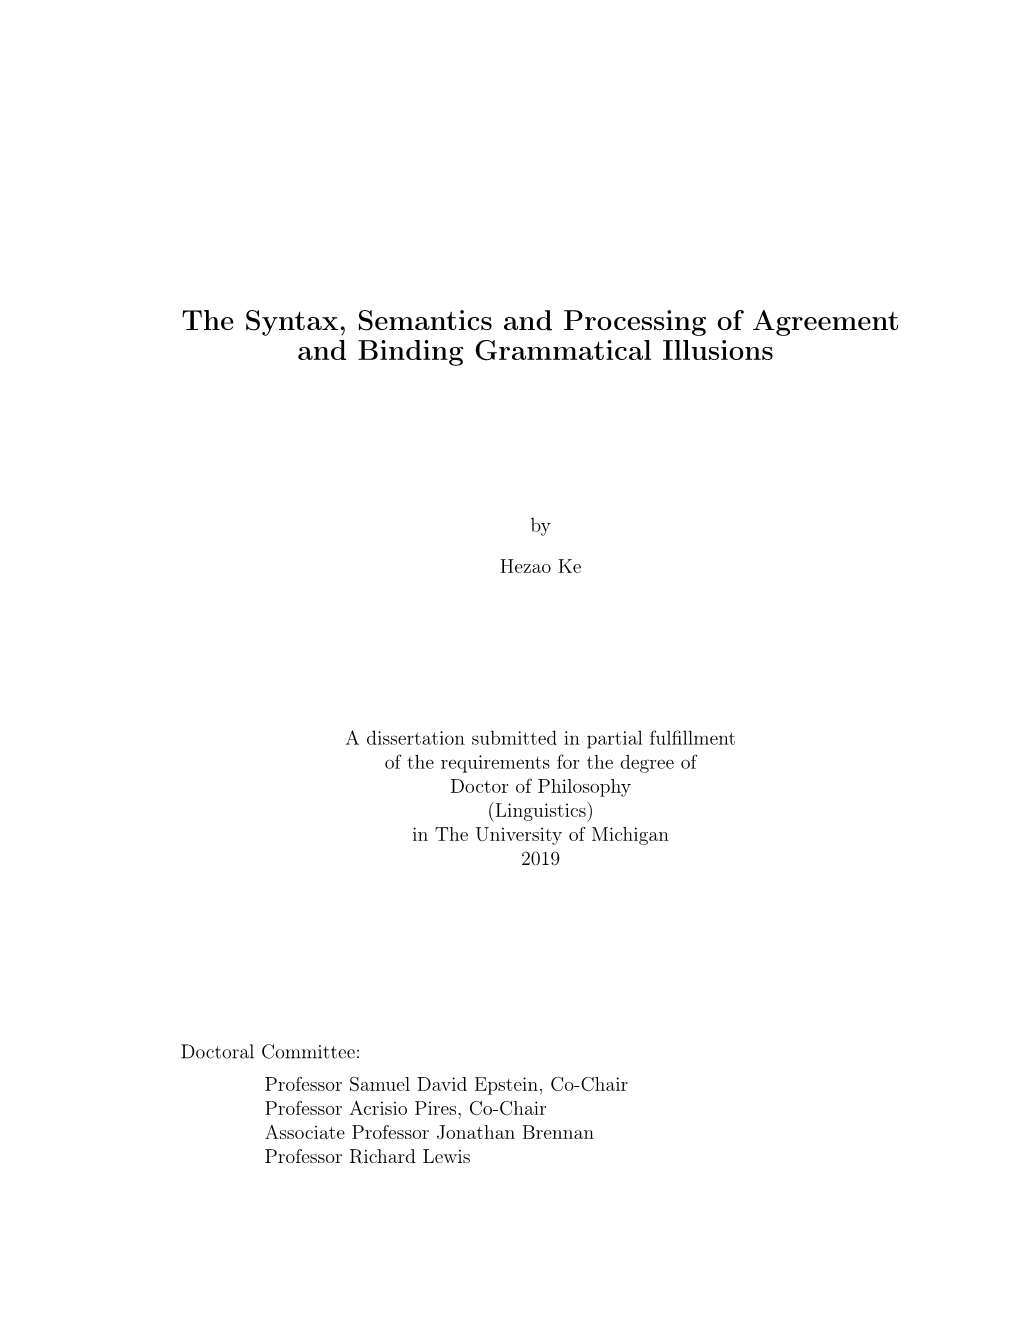 The Syntax, Semantics and Processing of Agreement and Binding Grammatical Illusions